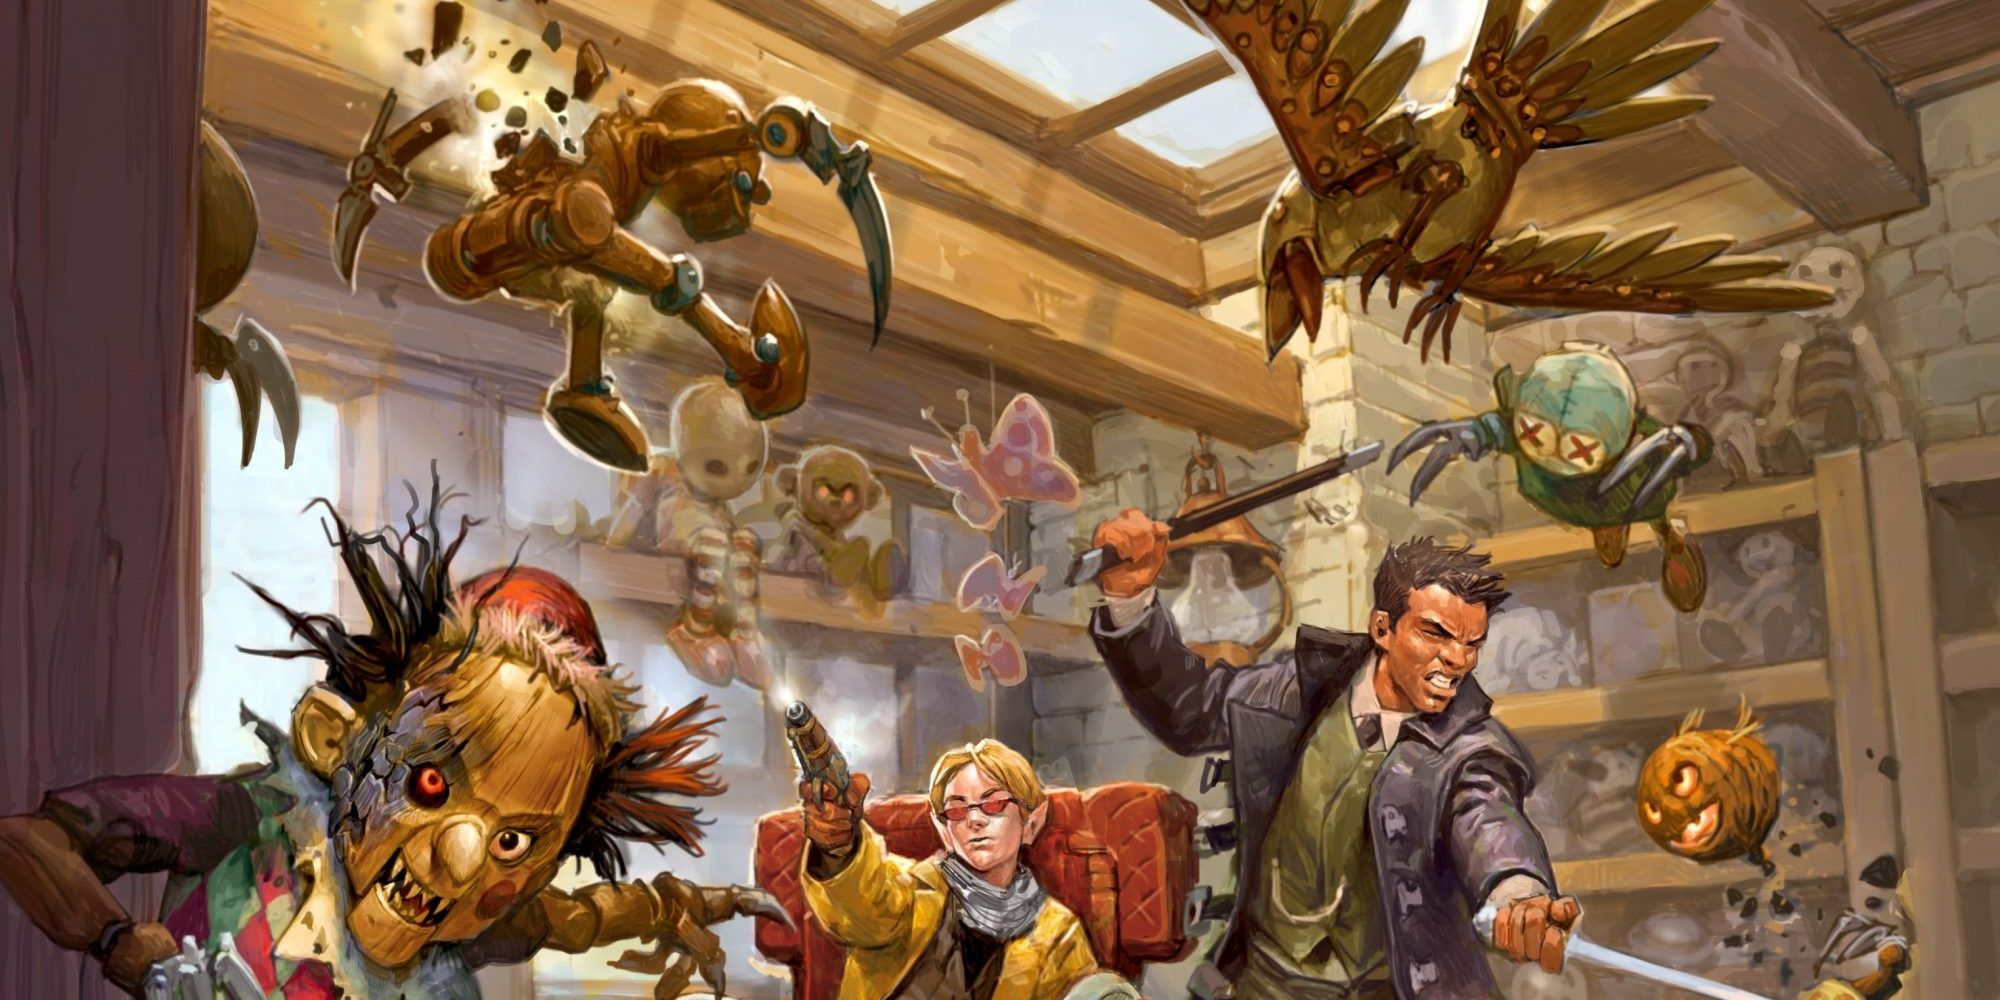 Dungeons & Dragons game store with toys attacking adventurers